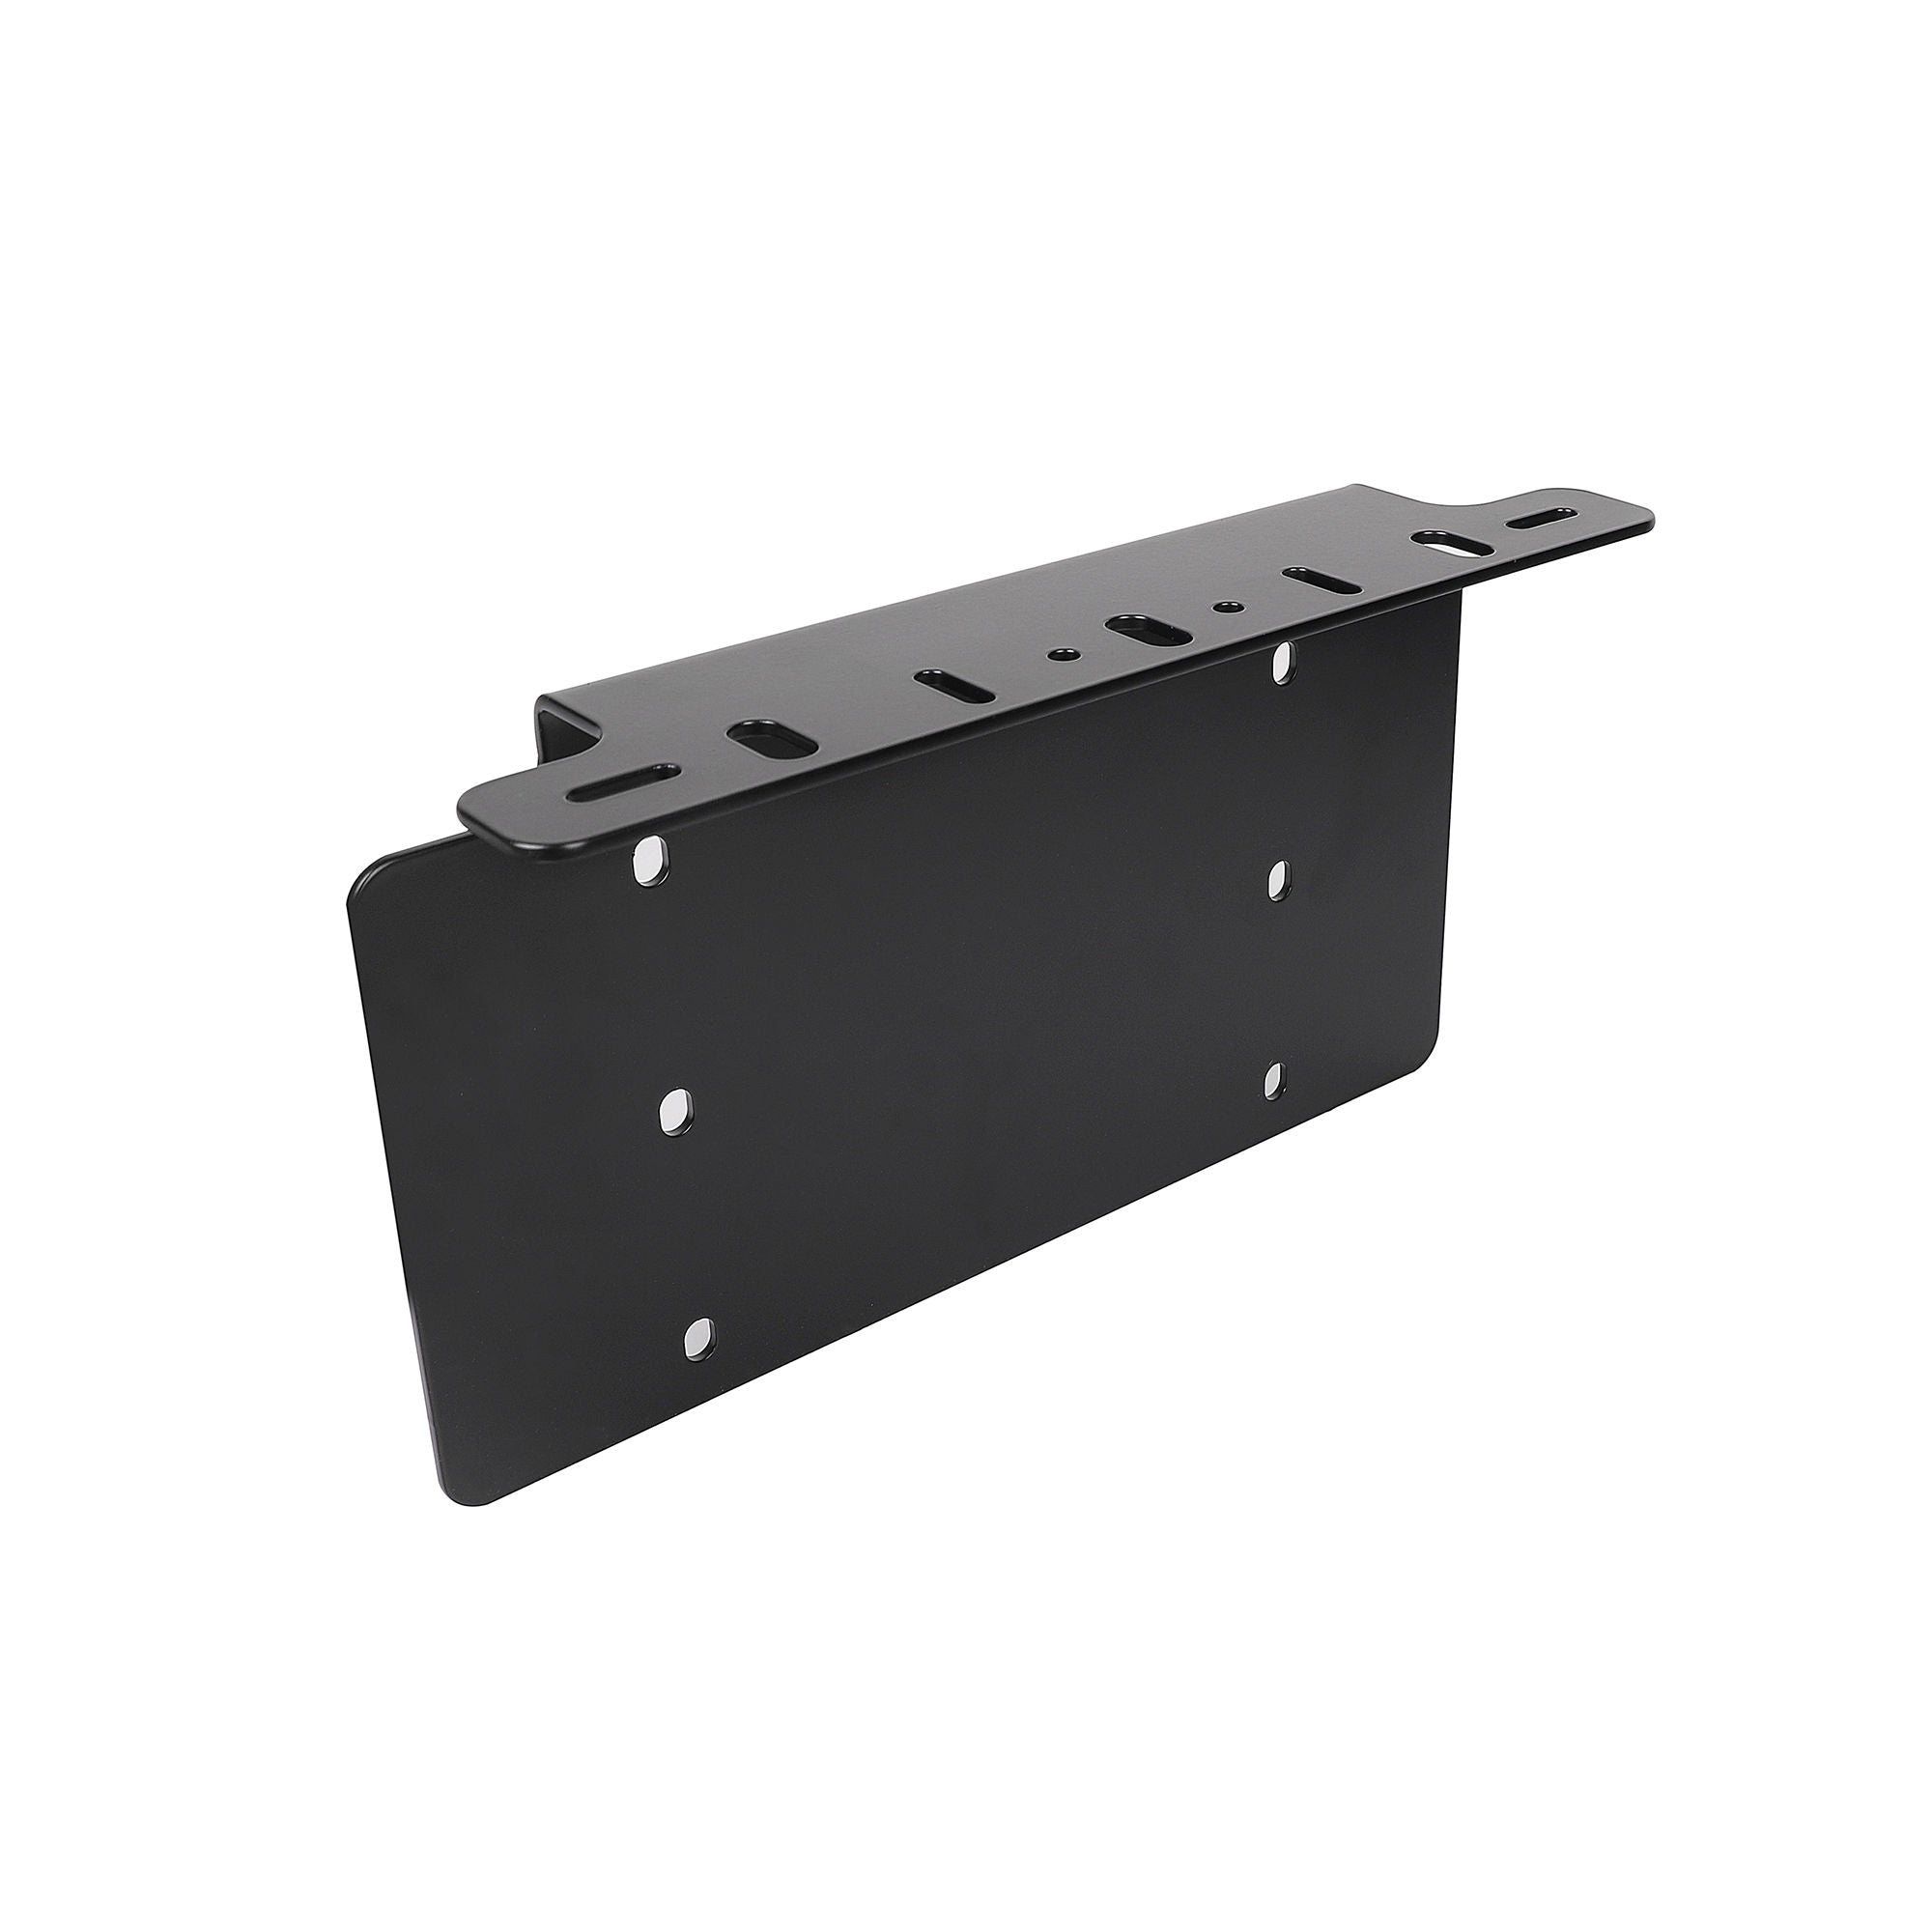 RTX RTXOA870021 - Front License Plate Mounting Bracket For SUV 4X4 4WD Off-Road Truck Jeep